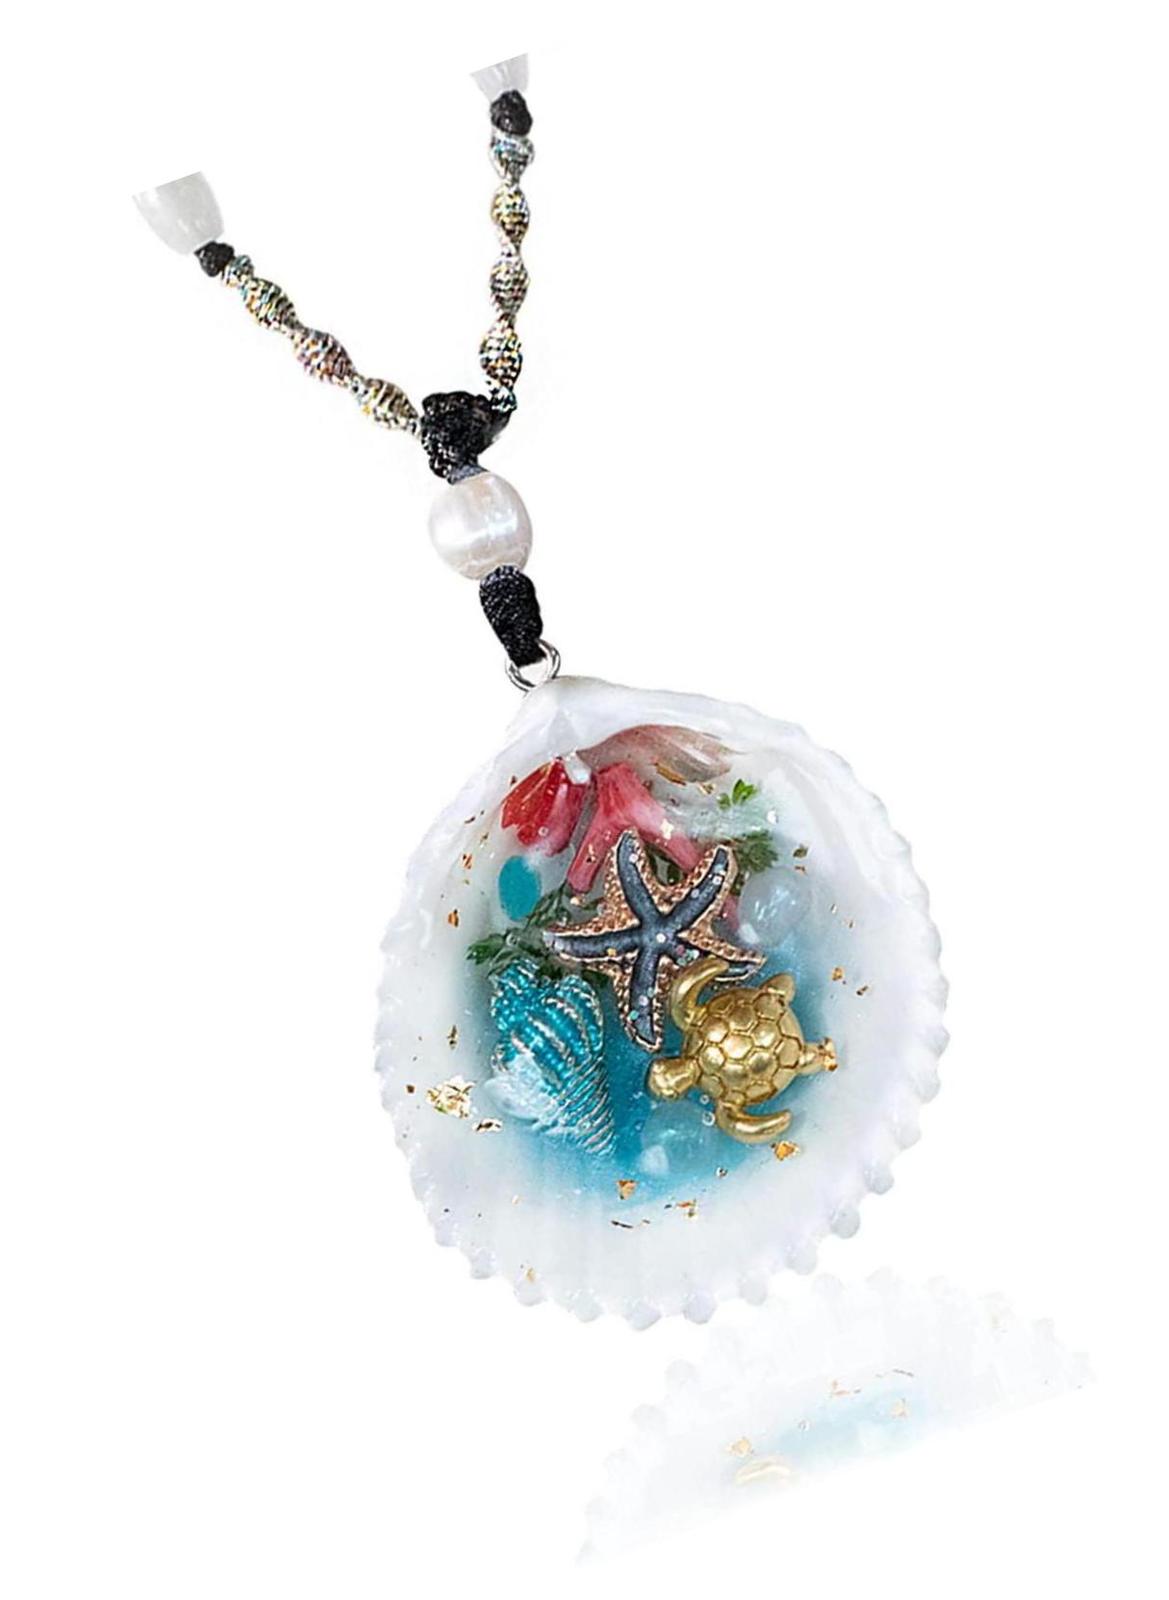 Primary image for Handmade Ocean-Themed Pendant Necklace: Conch,